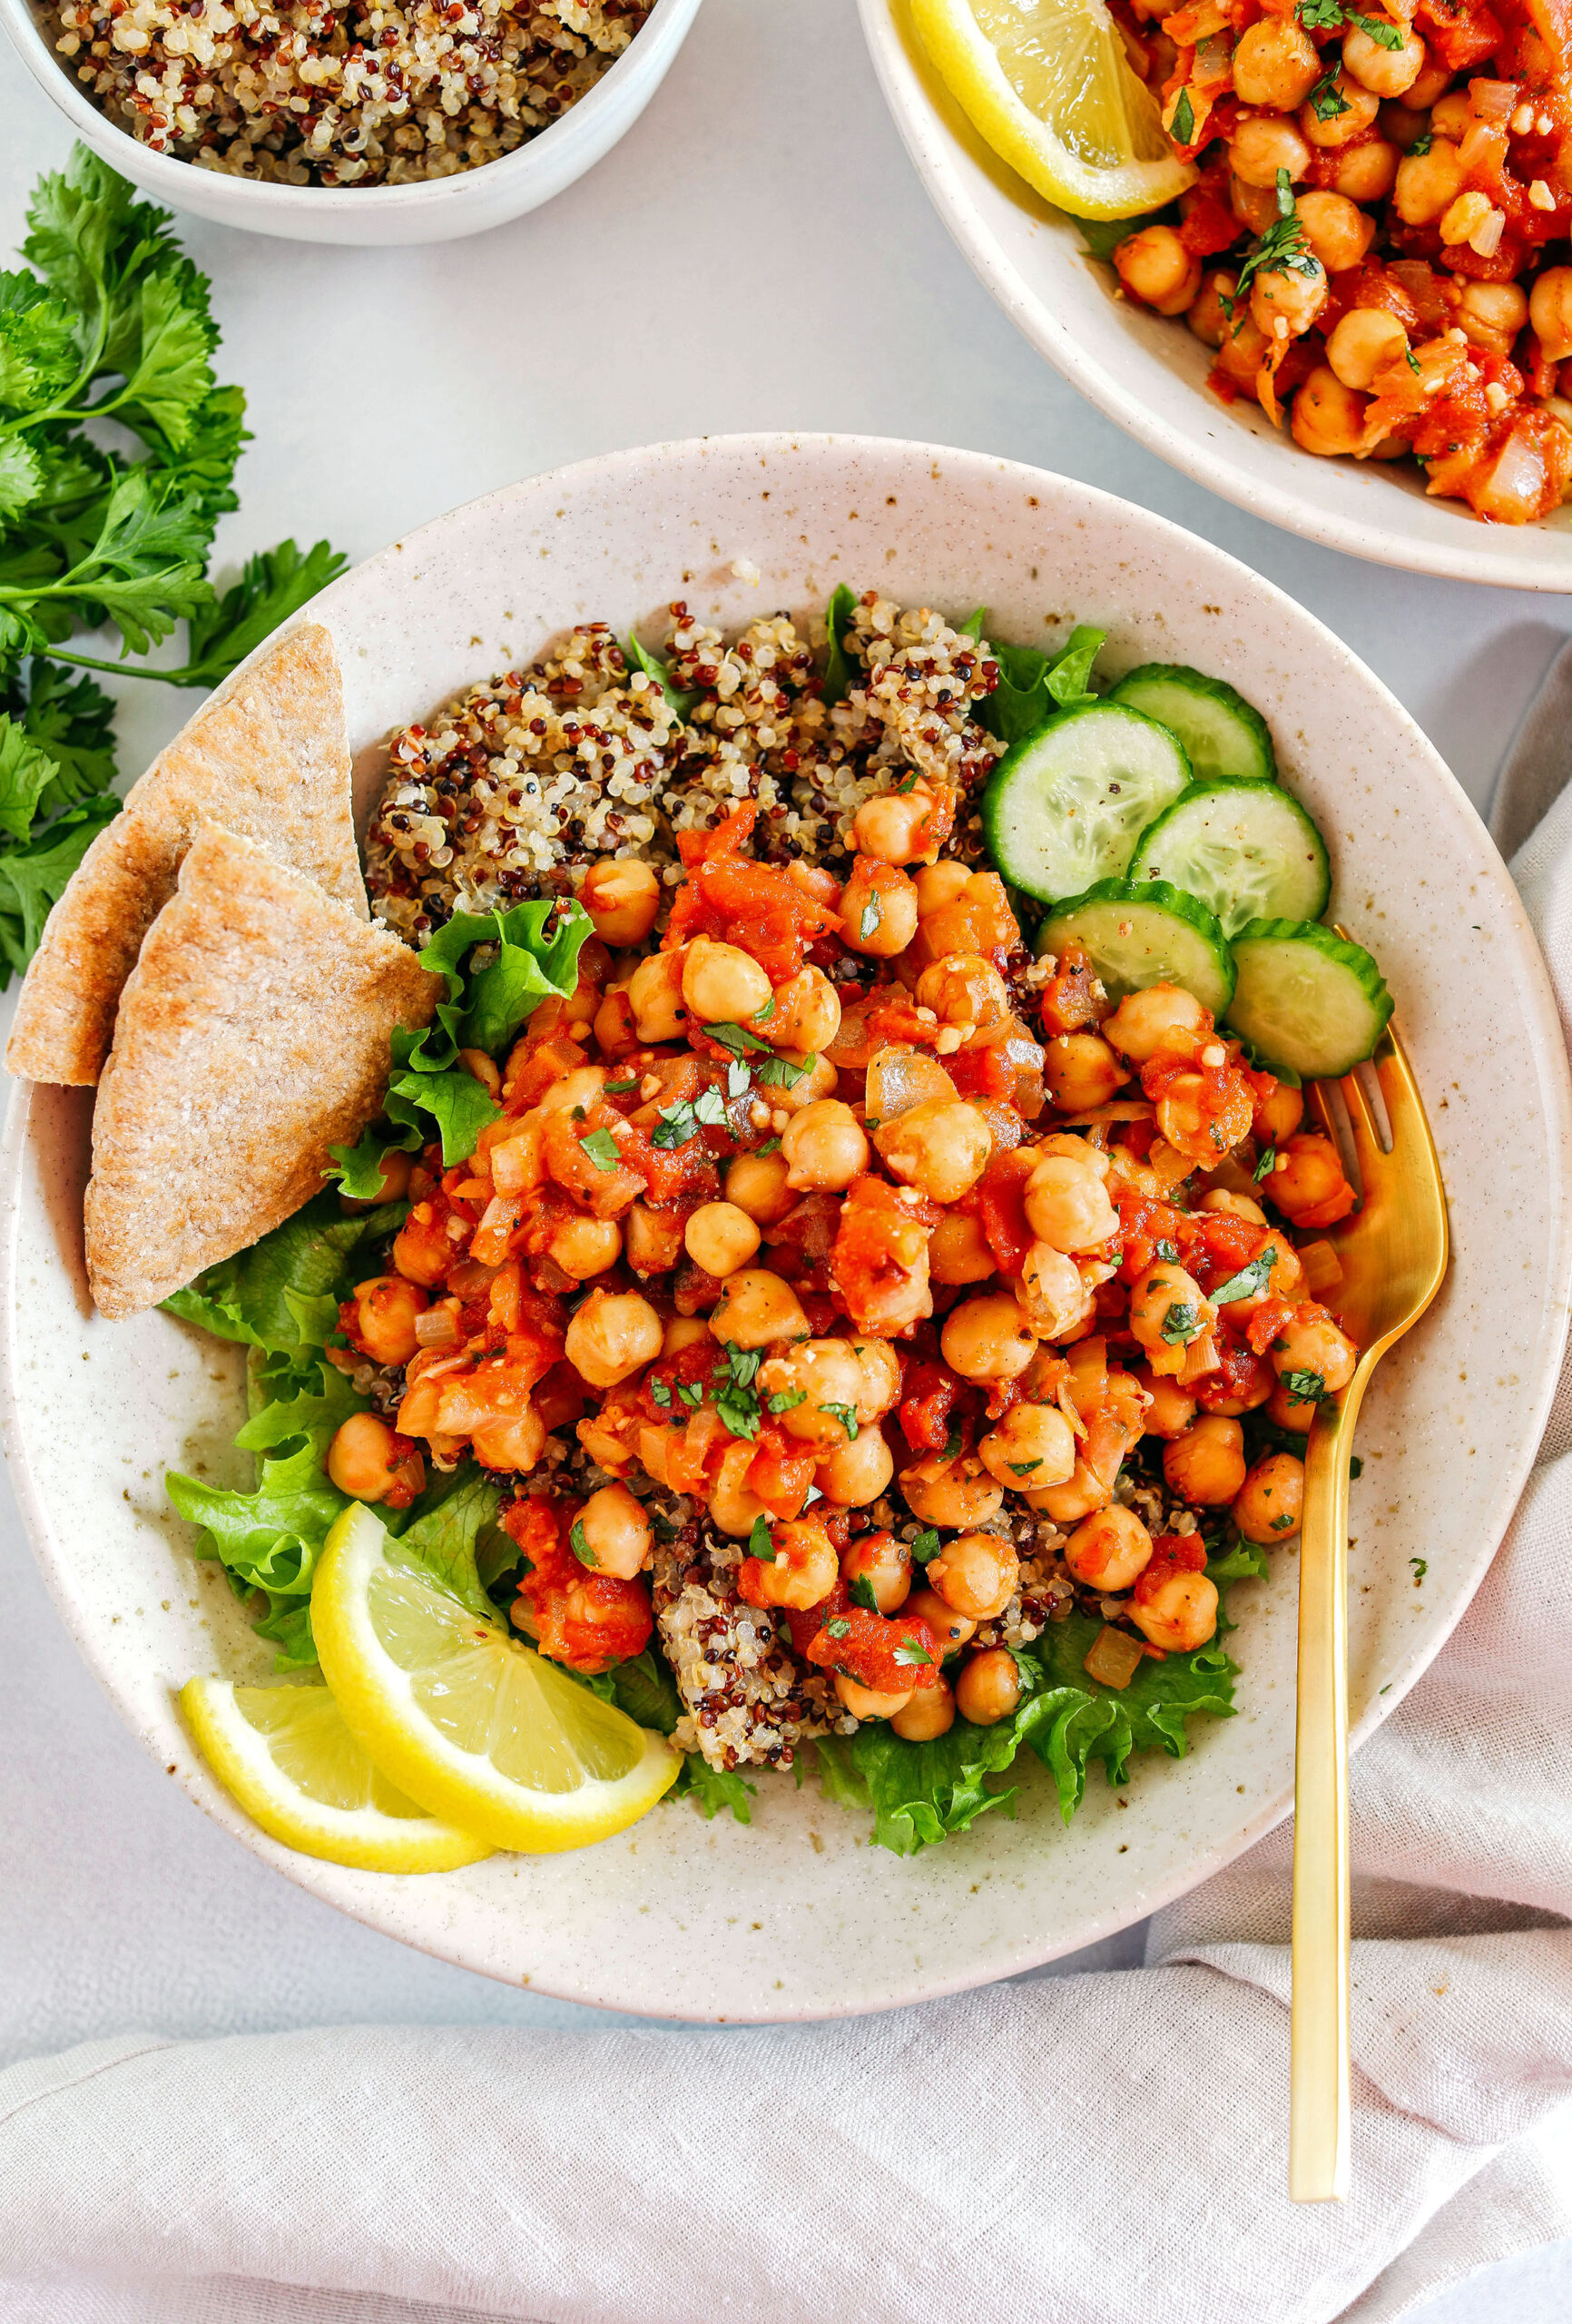 Protein-packed Spicy Chickpea Quinoa Bowls are loaded with flavor, perfect for meal prep and are easily made in just 20 minutes!  Drizzle my lemony tahini dressing over top for even more flavor!